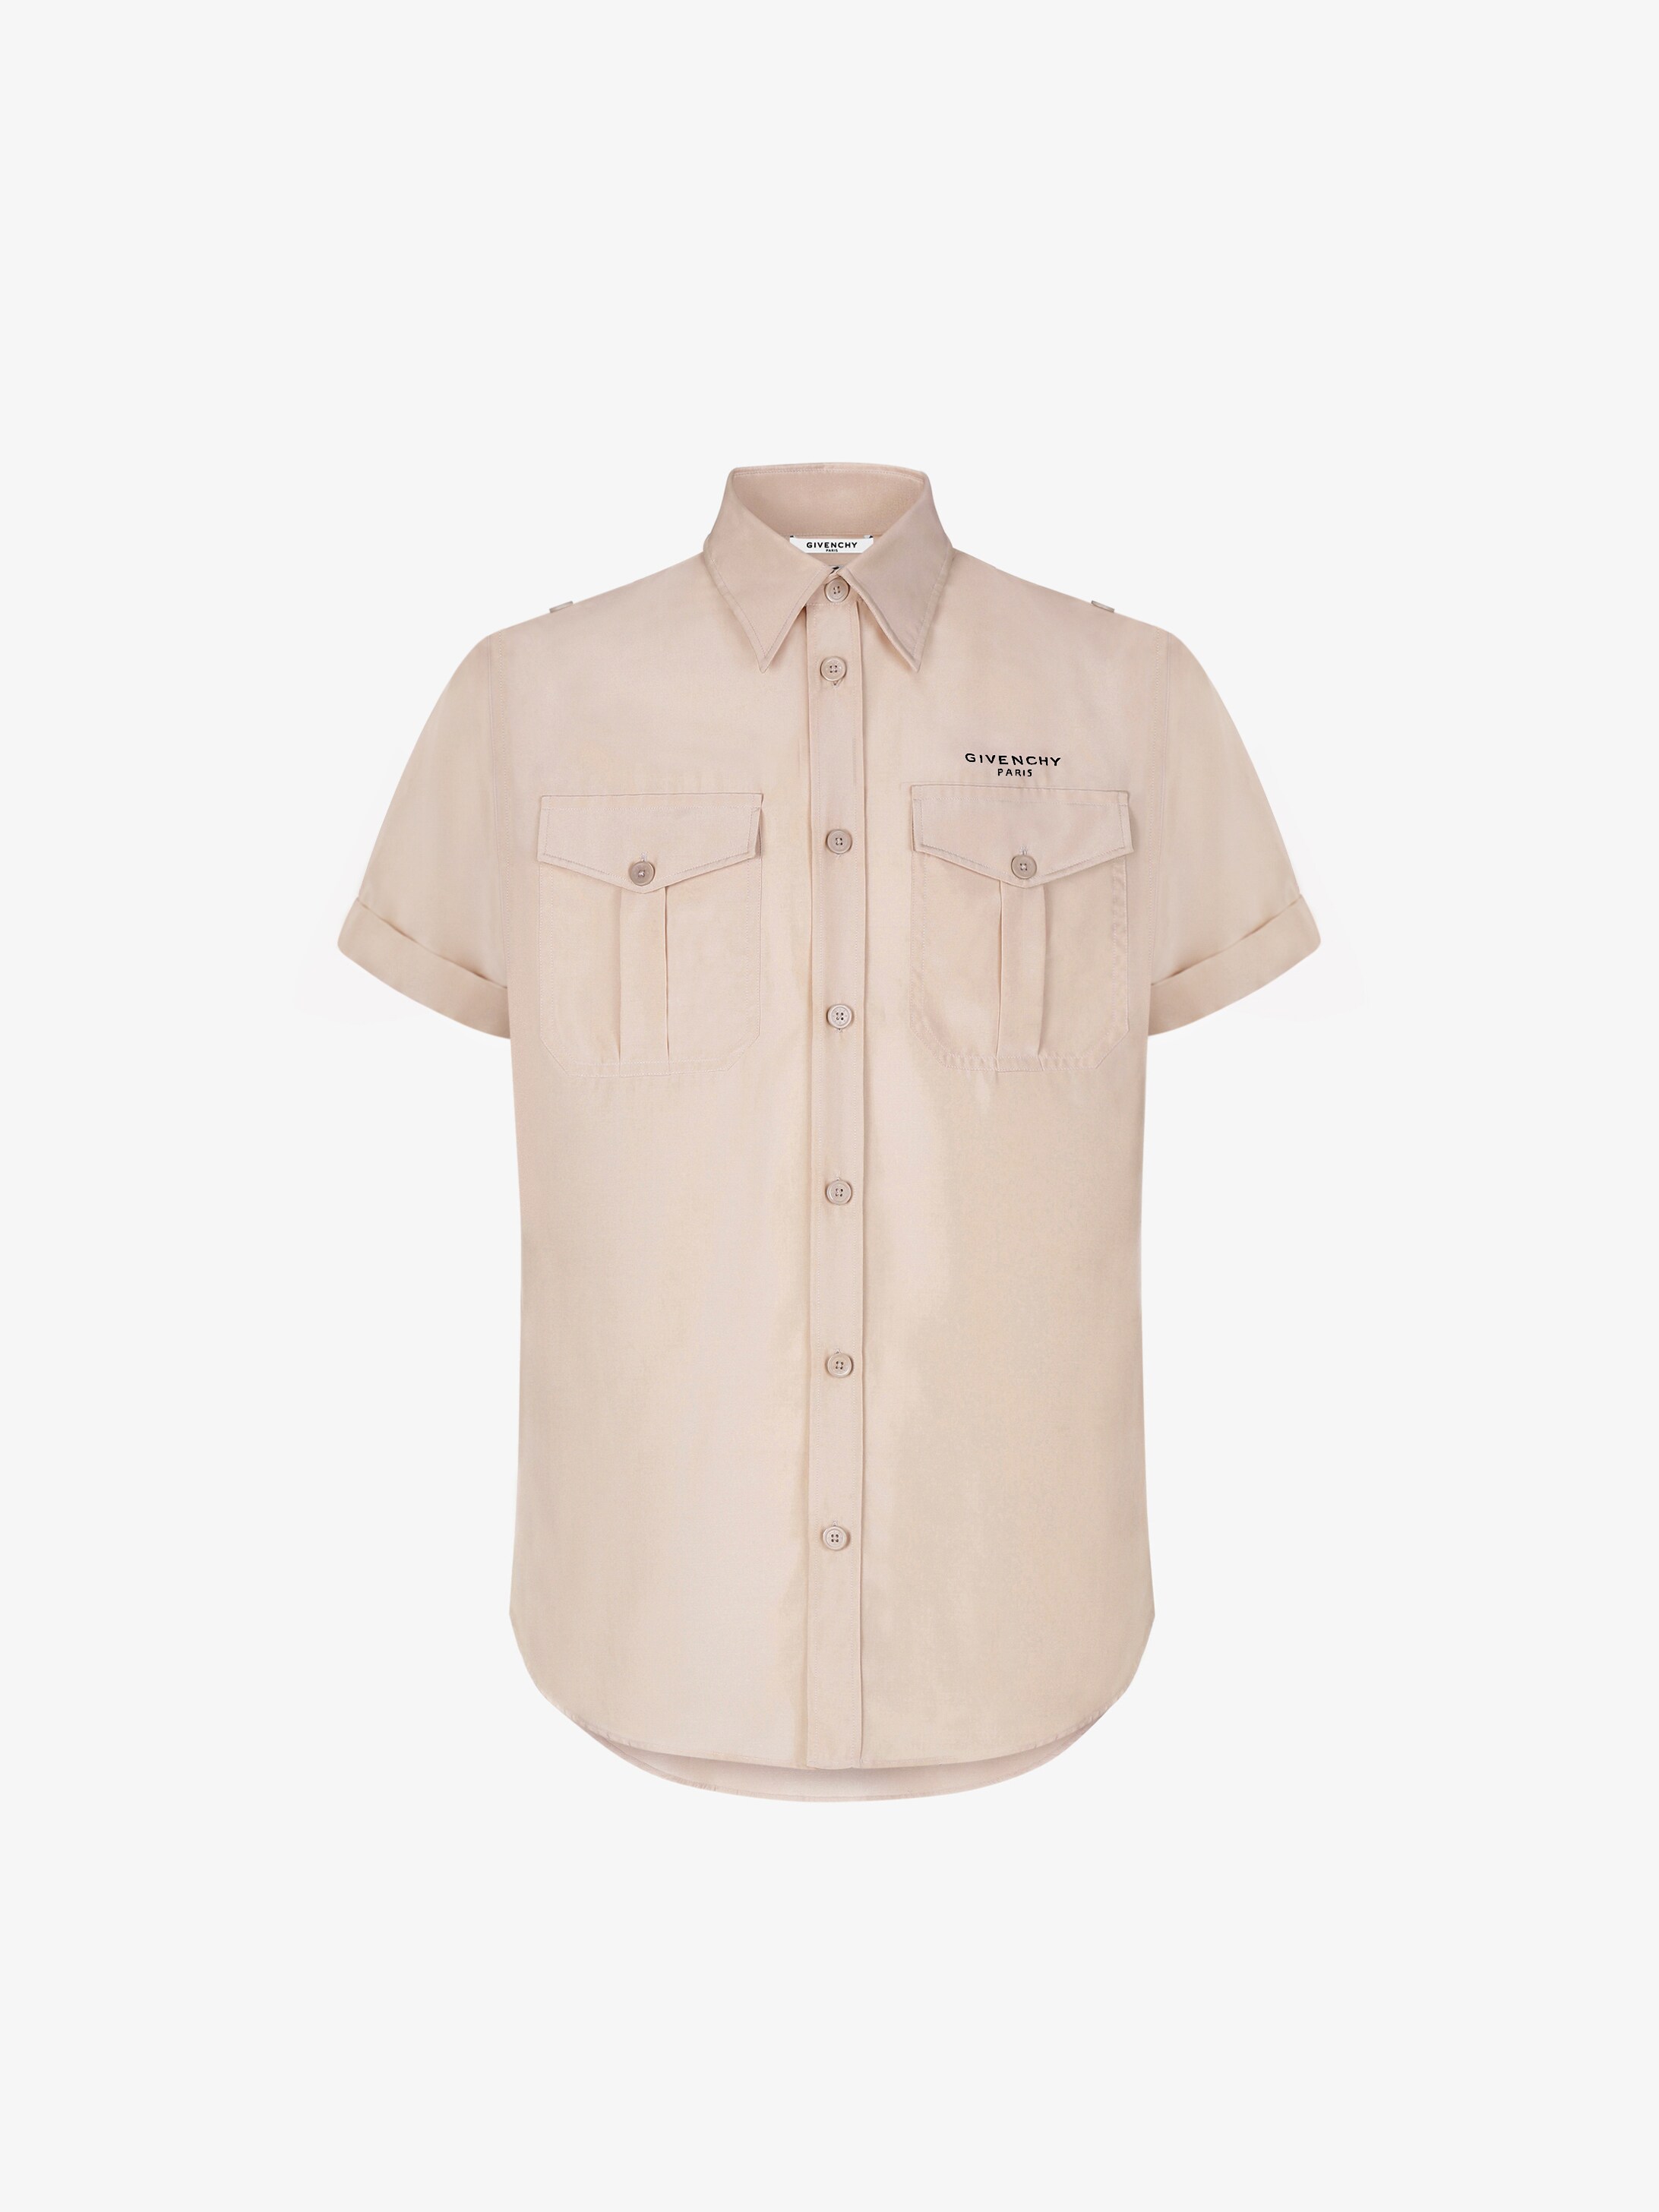 givenchy button up shirt